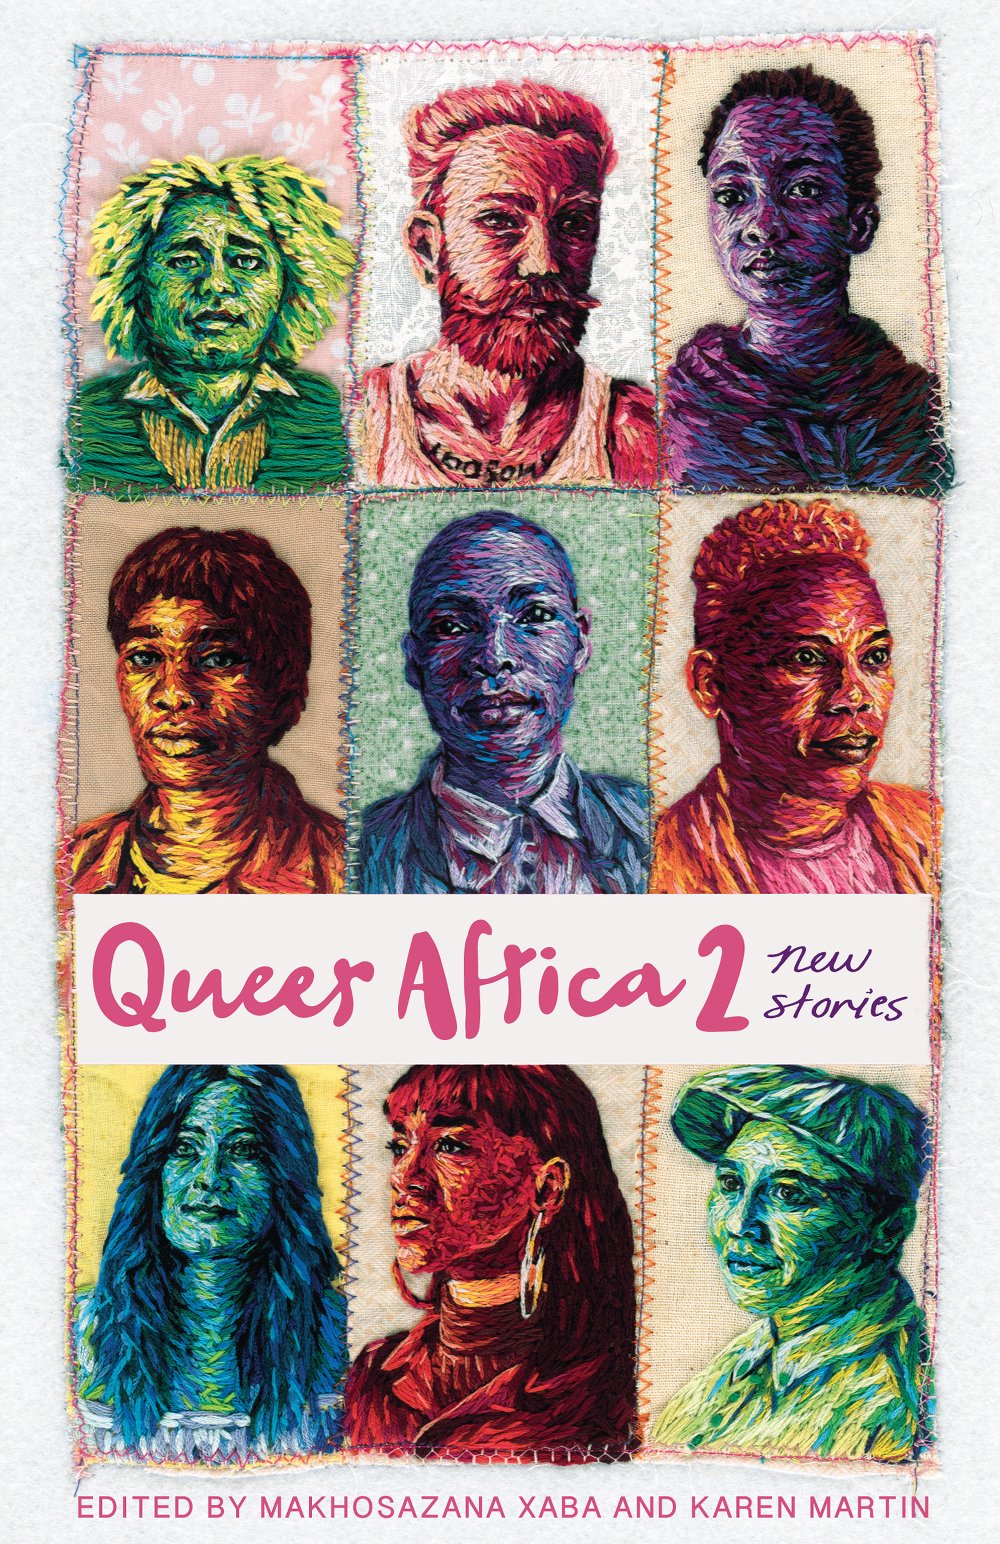 Image: Cover of the second volume of Queer Africa